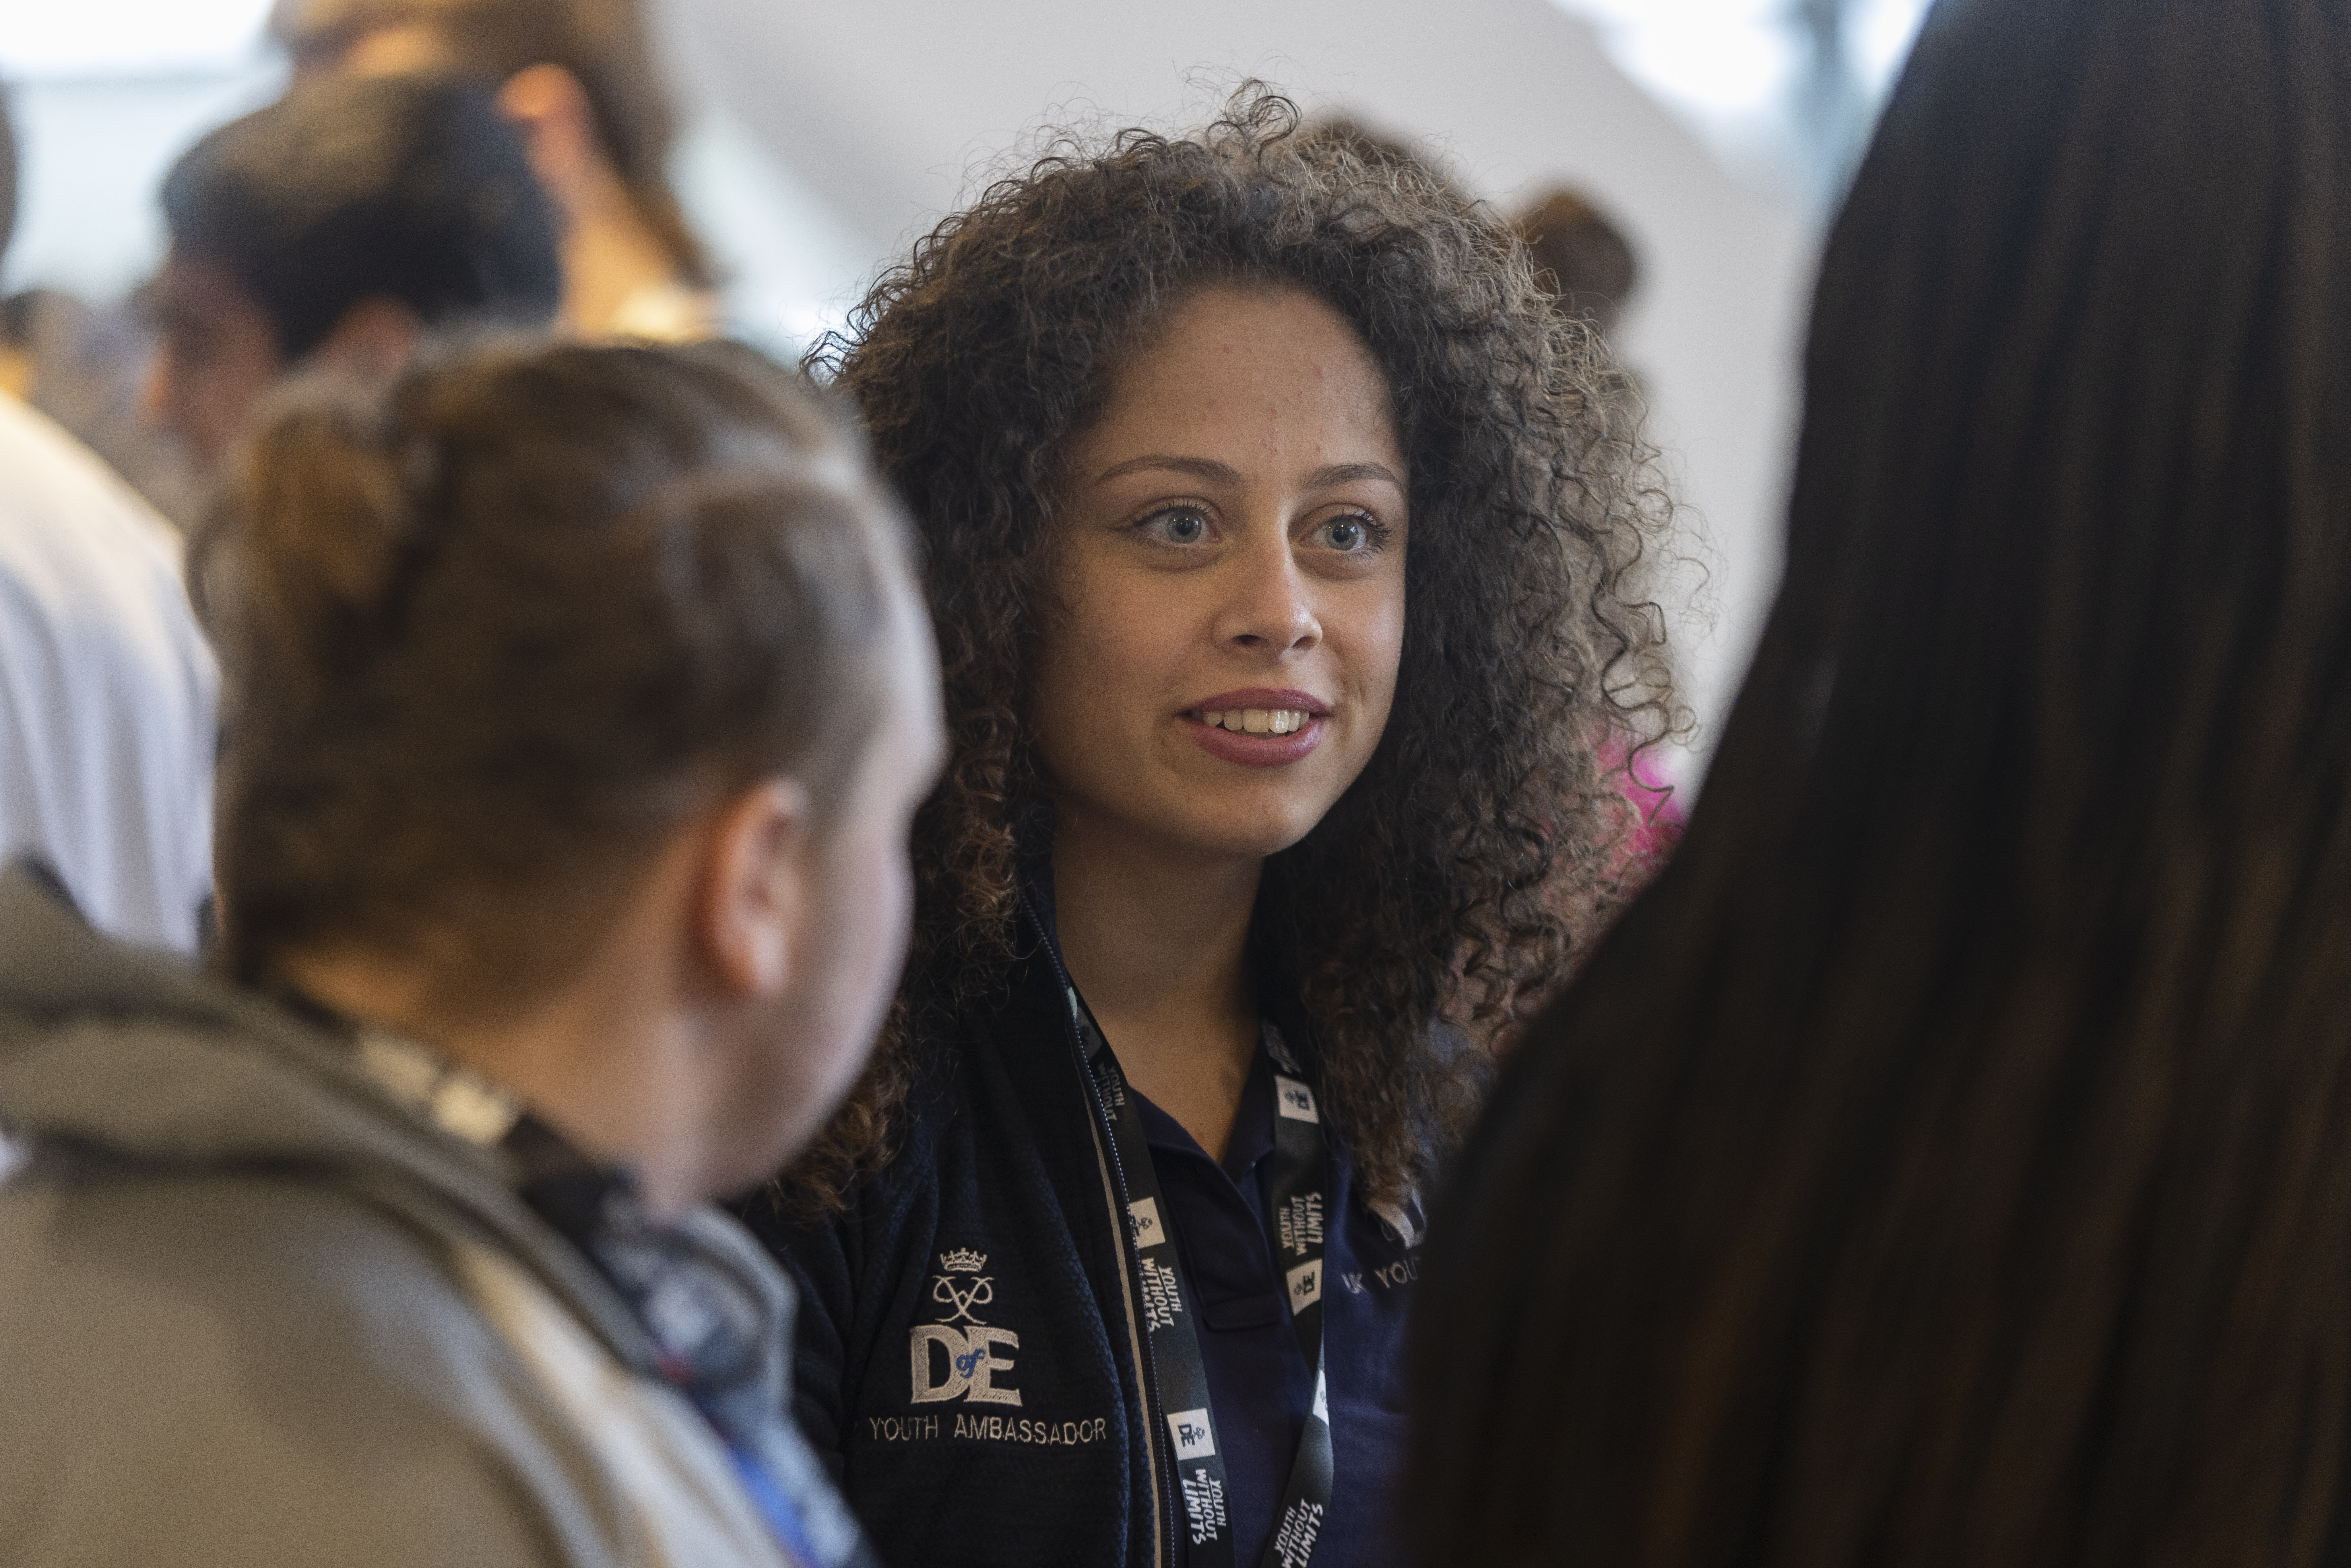 A Youth Ambassador talking to another person and looking away from the camera. She is wearing a DofE lanyard and Youth Ambassador polo shirt.